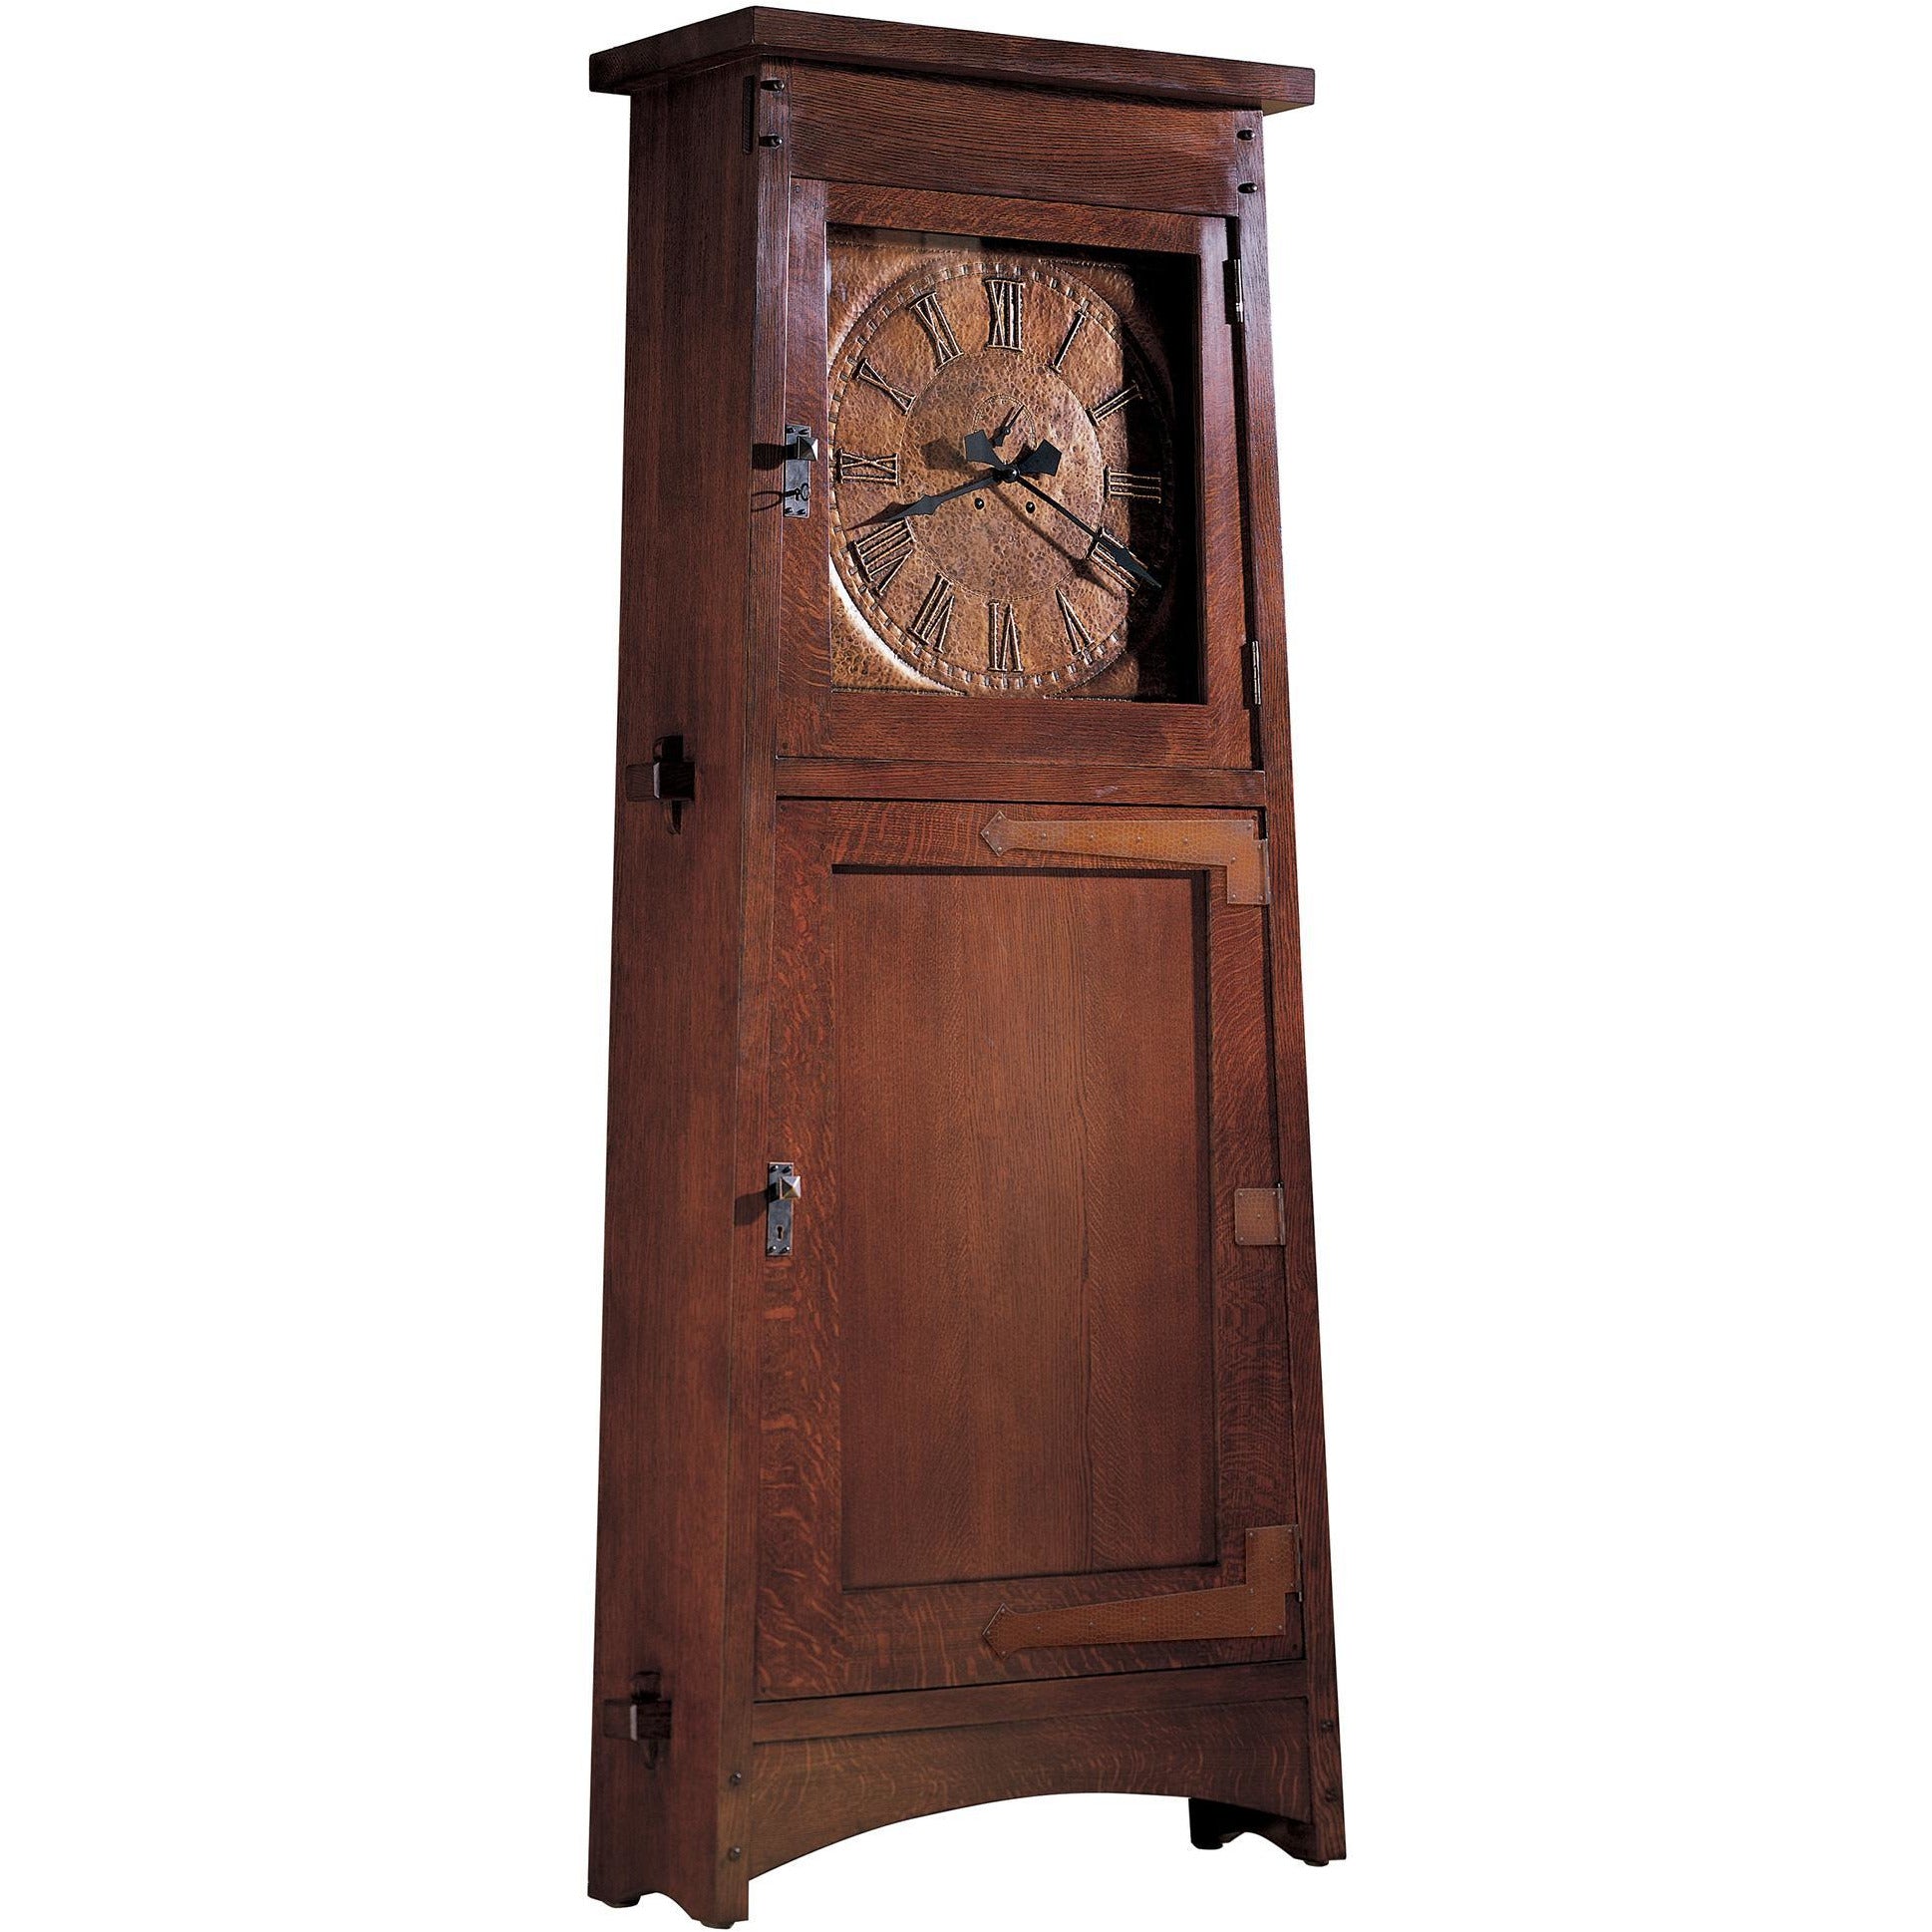 Asheville Clock with Strap Hinge